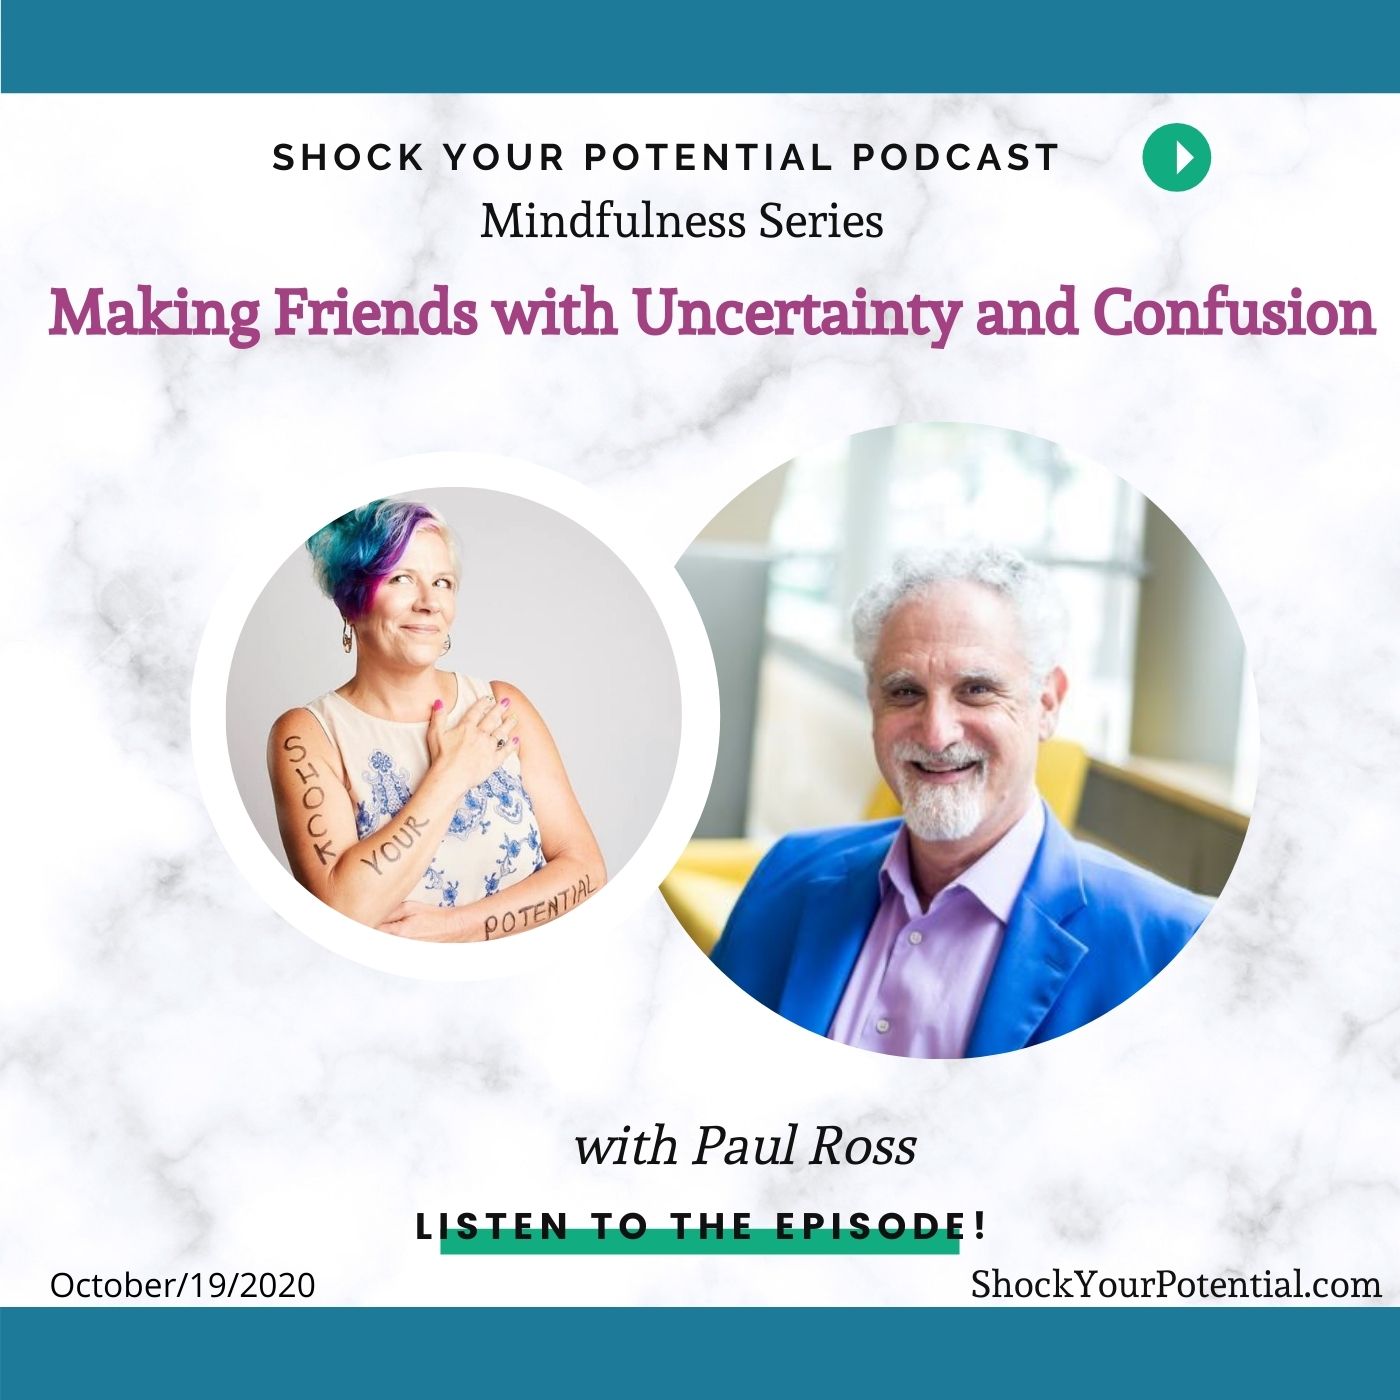 Making Friends with Uncertainty and Confusion – Paul Ross